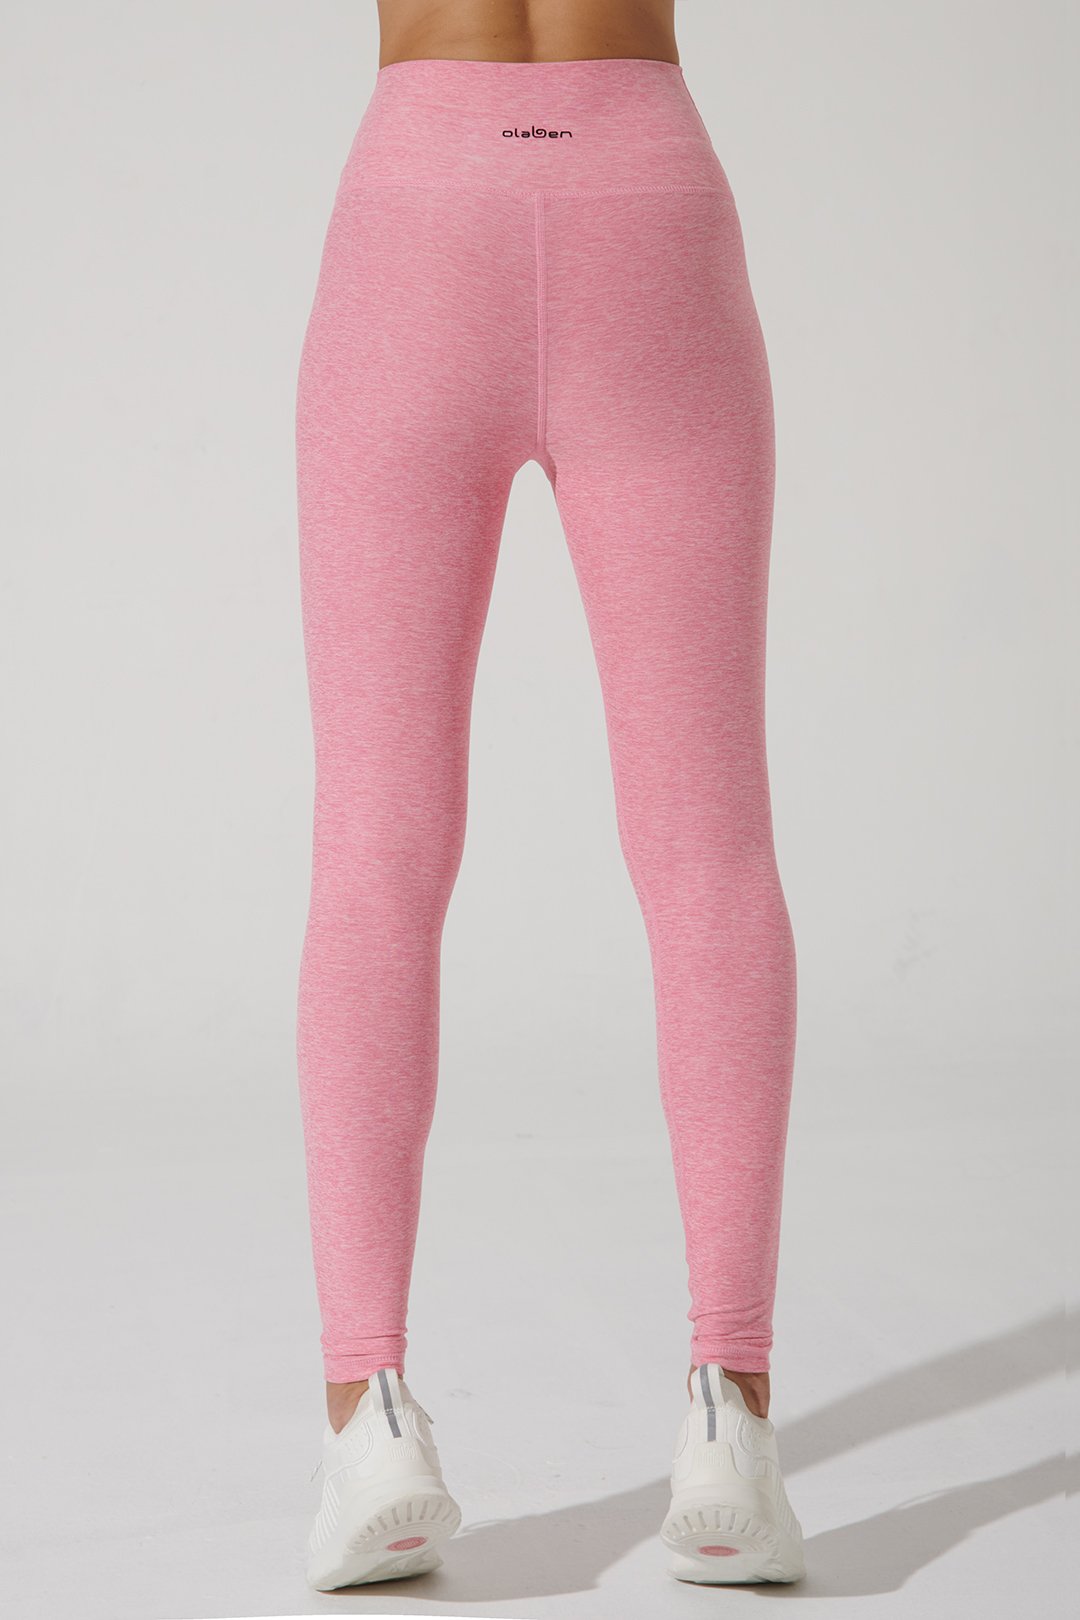 Cheri's women's leggings in peaches pink, a stylish and comfortable choice for any occasion.